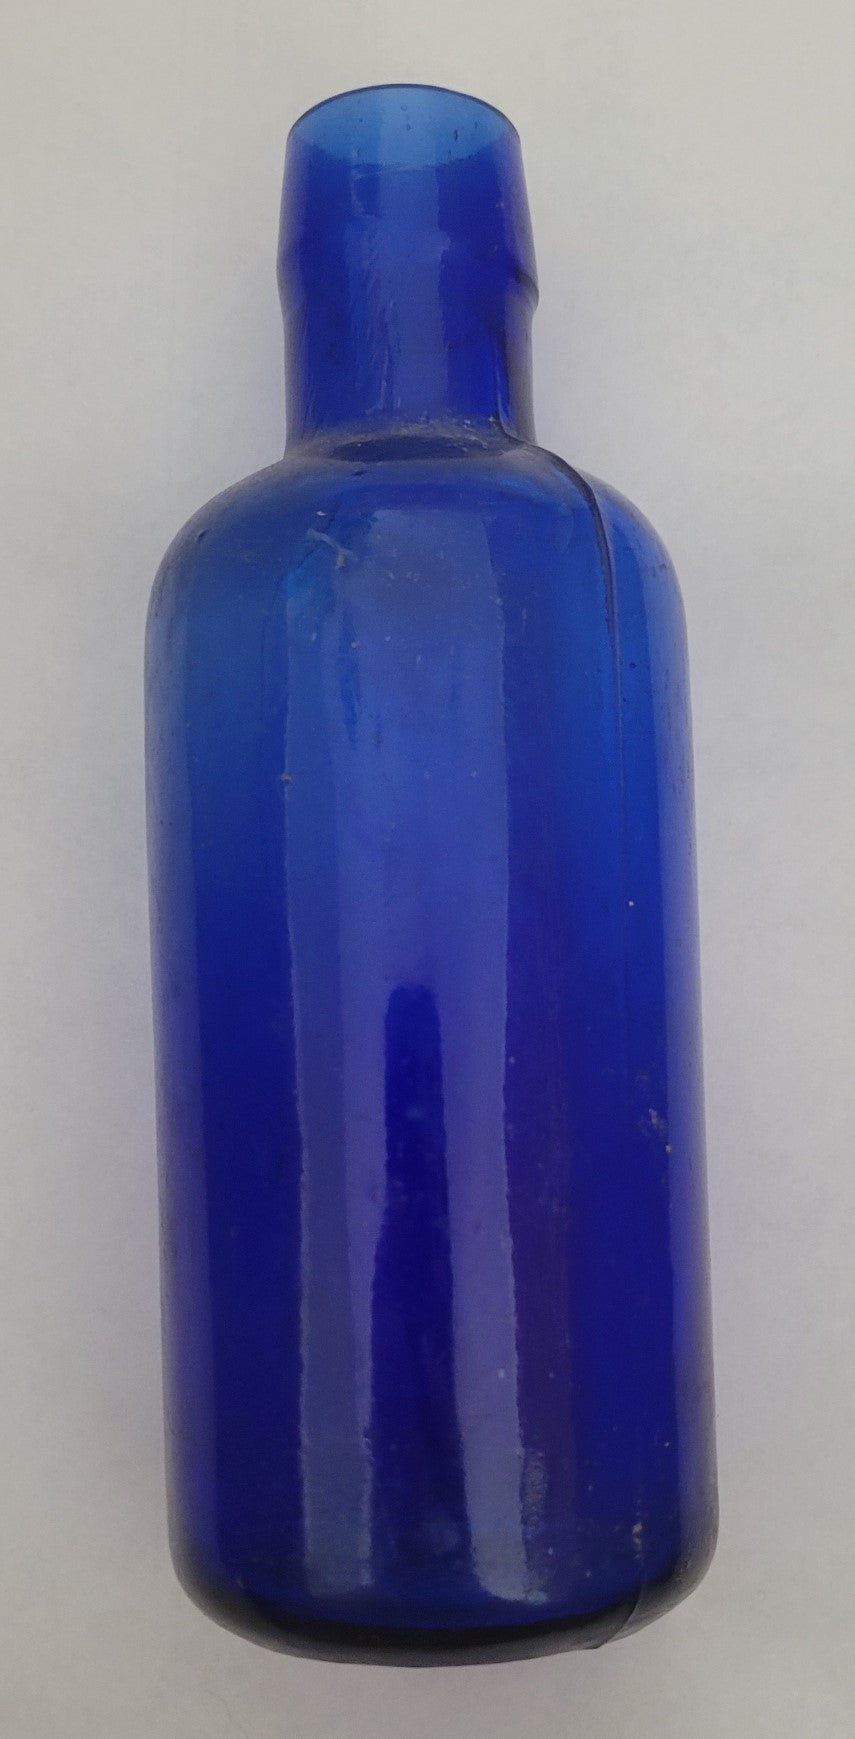 Antique cobalt blue bottle. Bottom markings have "H. K. Mulford Co. Philadelphia" around the edge and "4-S" in middle.  Dates from 1805 - 1929